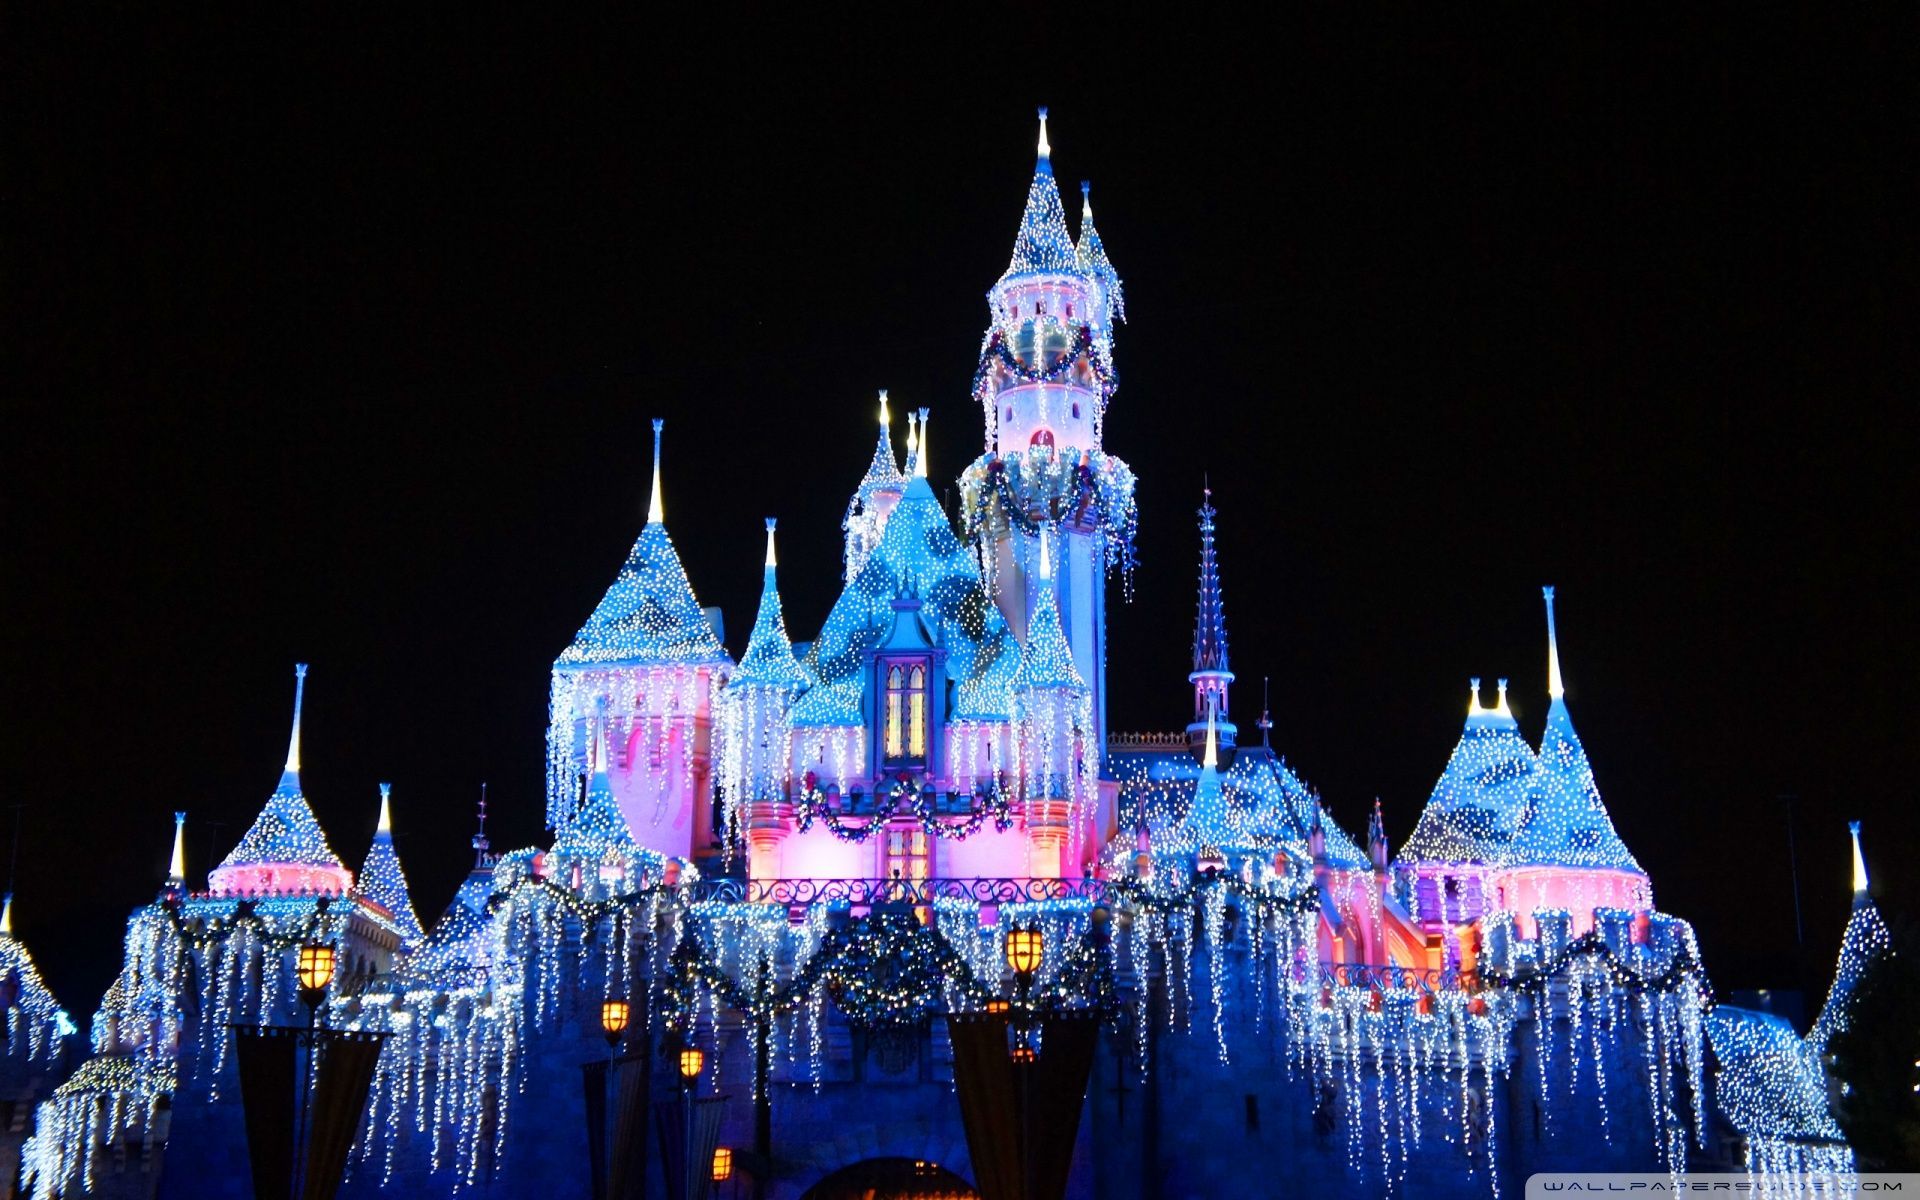 The castle is lit up with Christmas lights. - Disneyland